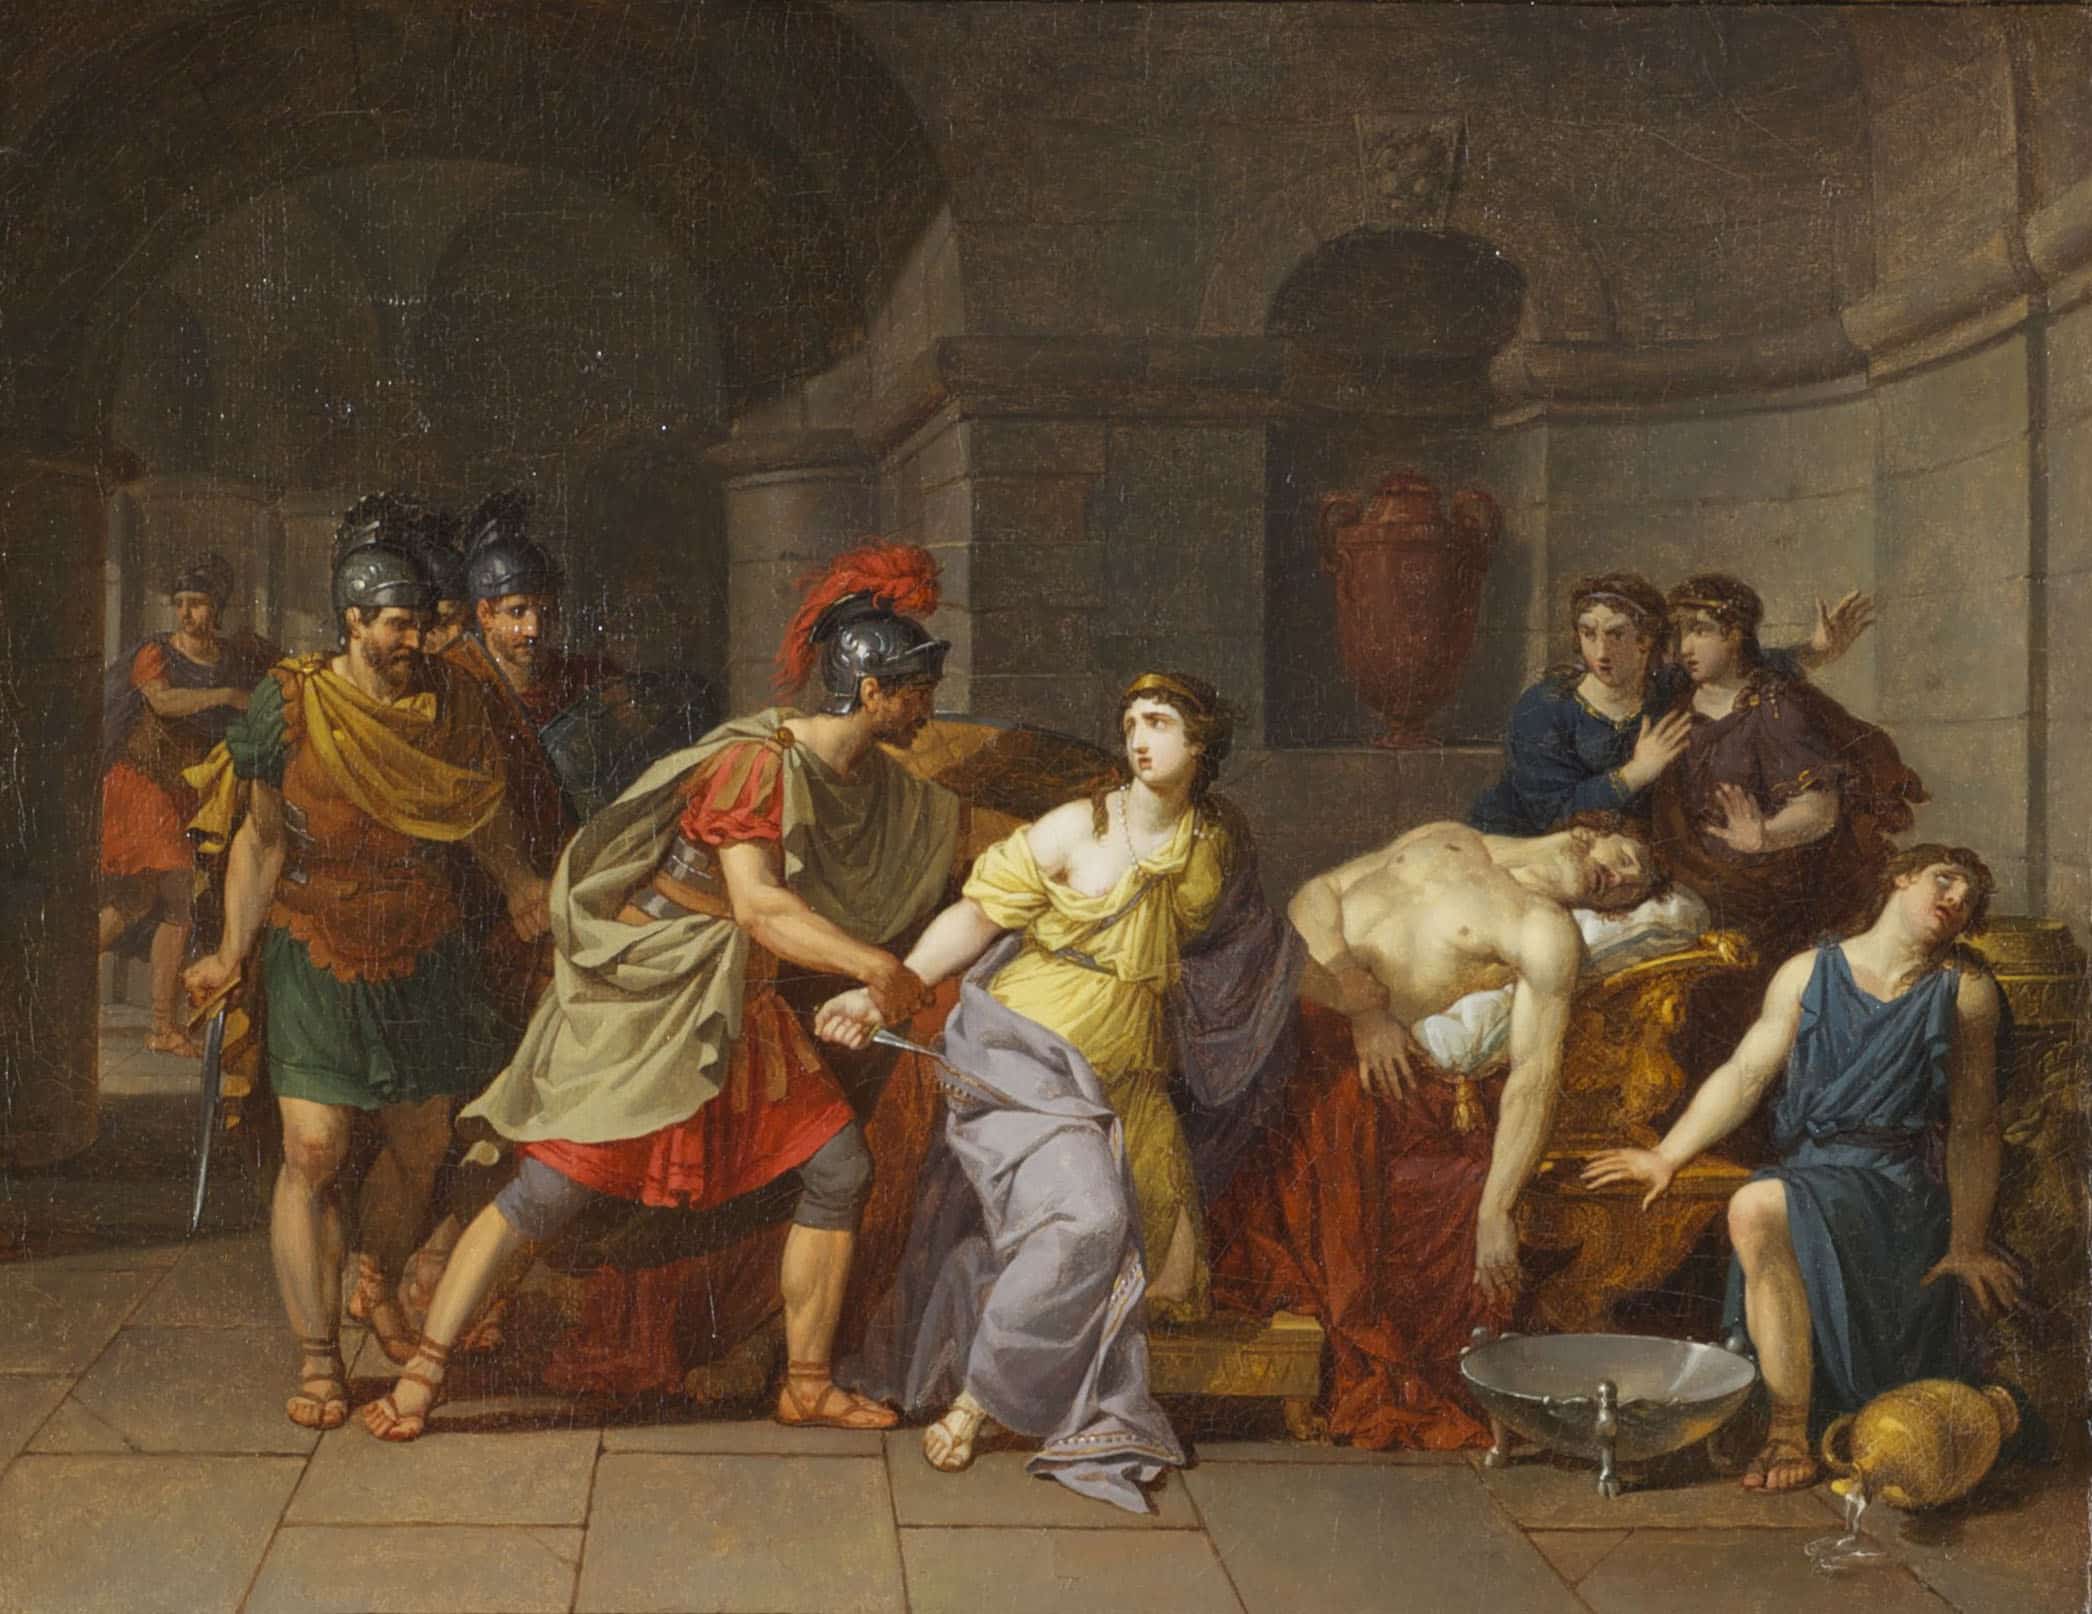 a woman in Roman costume is arrested by several roman soldiers and a man lies dying on a bed